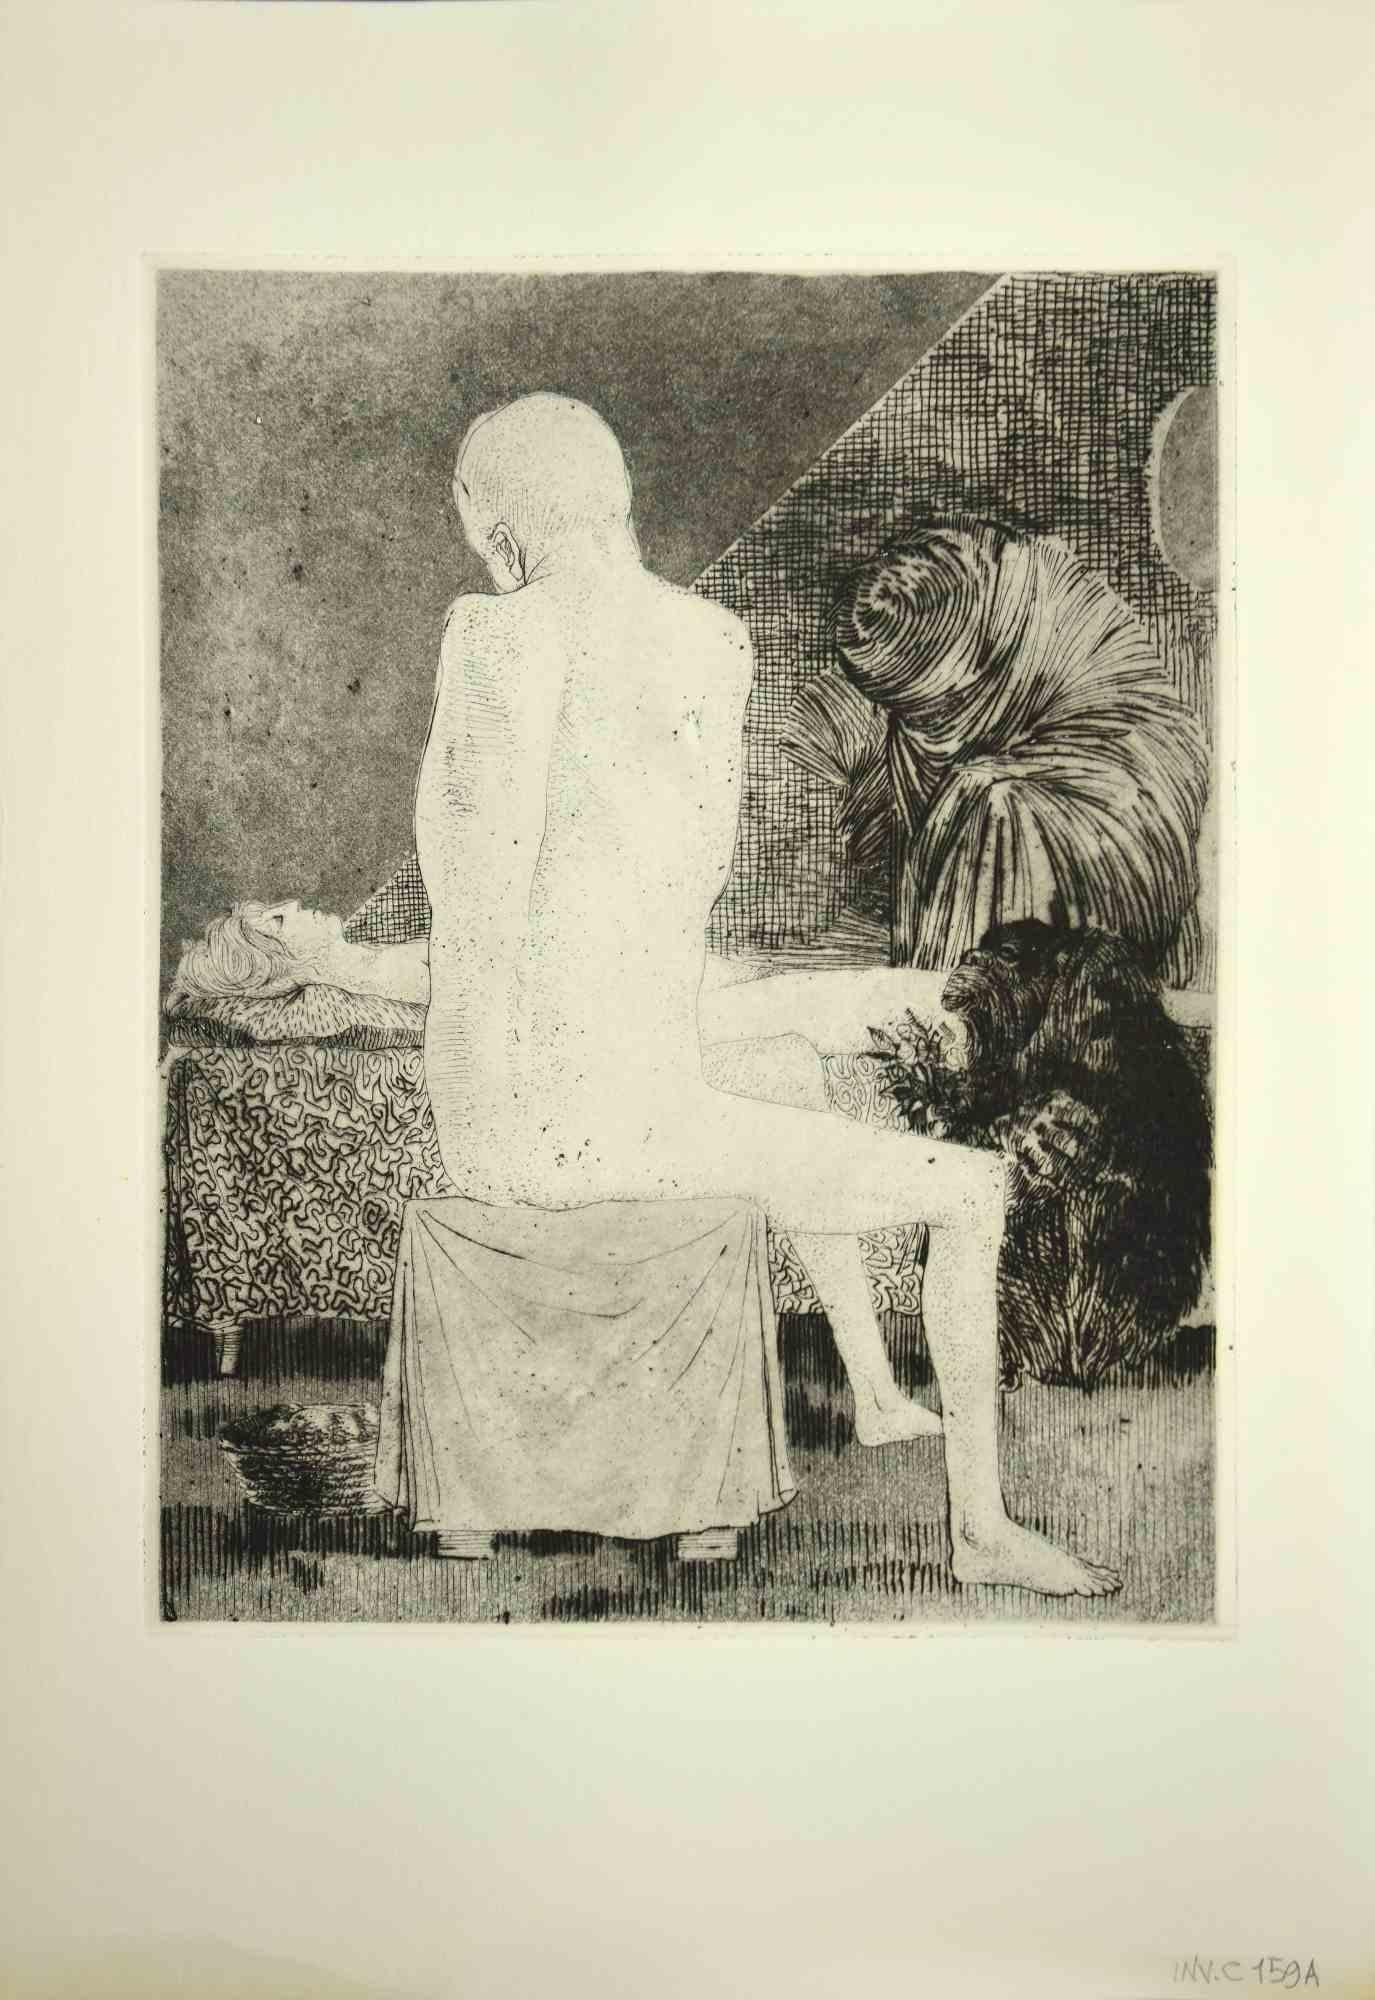 The Silence is an original etching on paper realized by Leo Guida in 1971.

Good condition.

Leo Guida  (1992 - 2017). Sensitive to current issues, artistic movements and historical techniques, Leo Guida has been able to weave with many generations